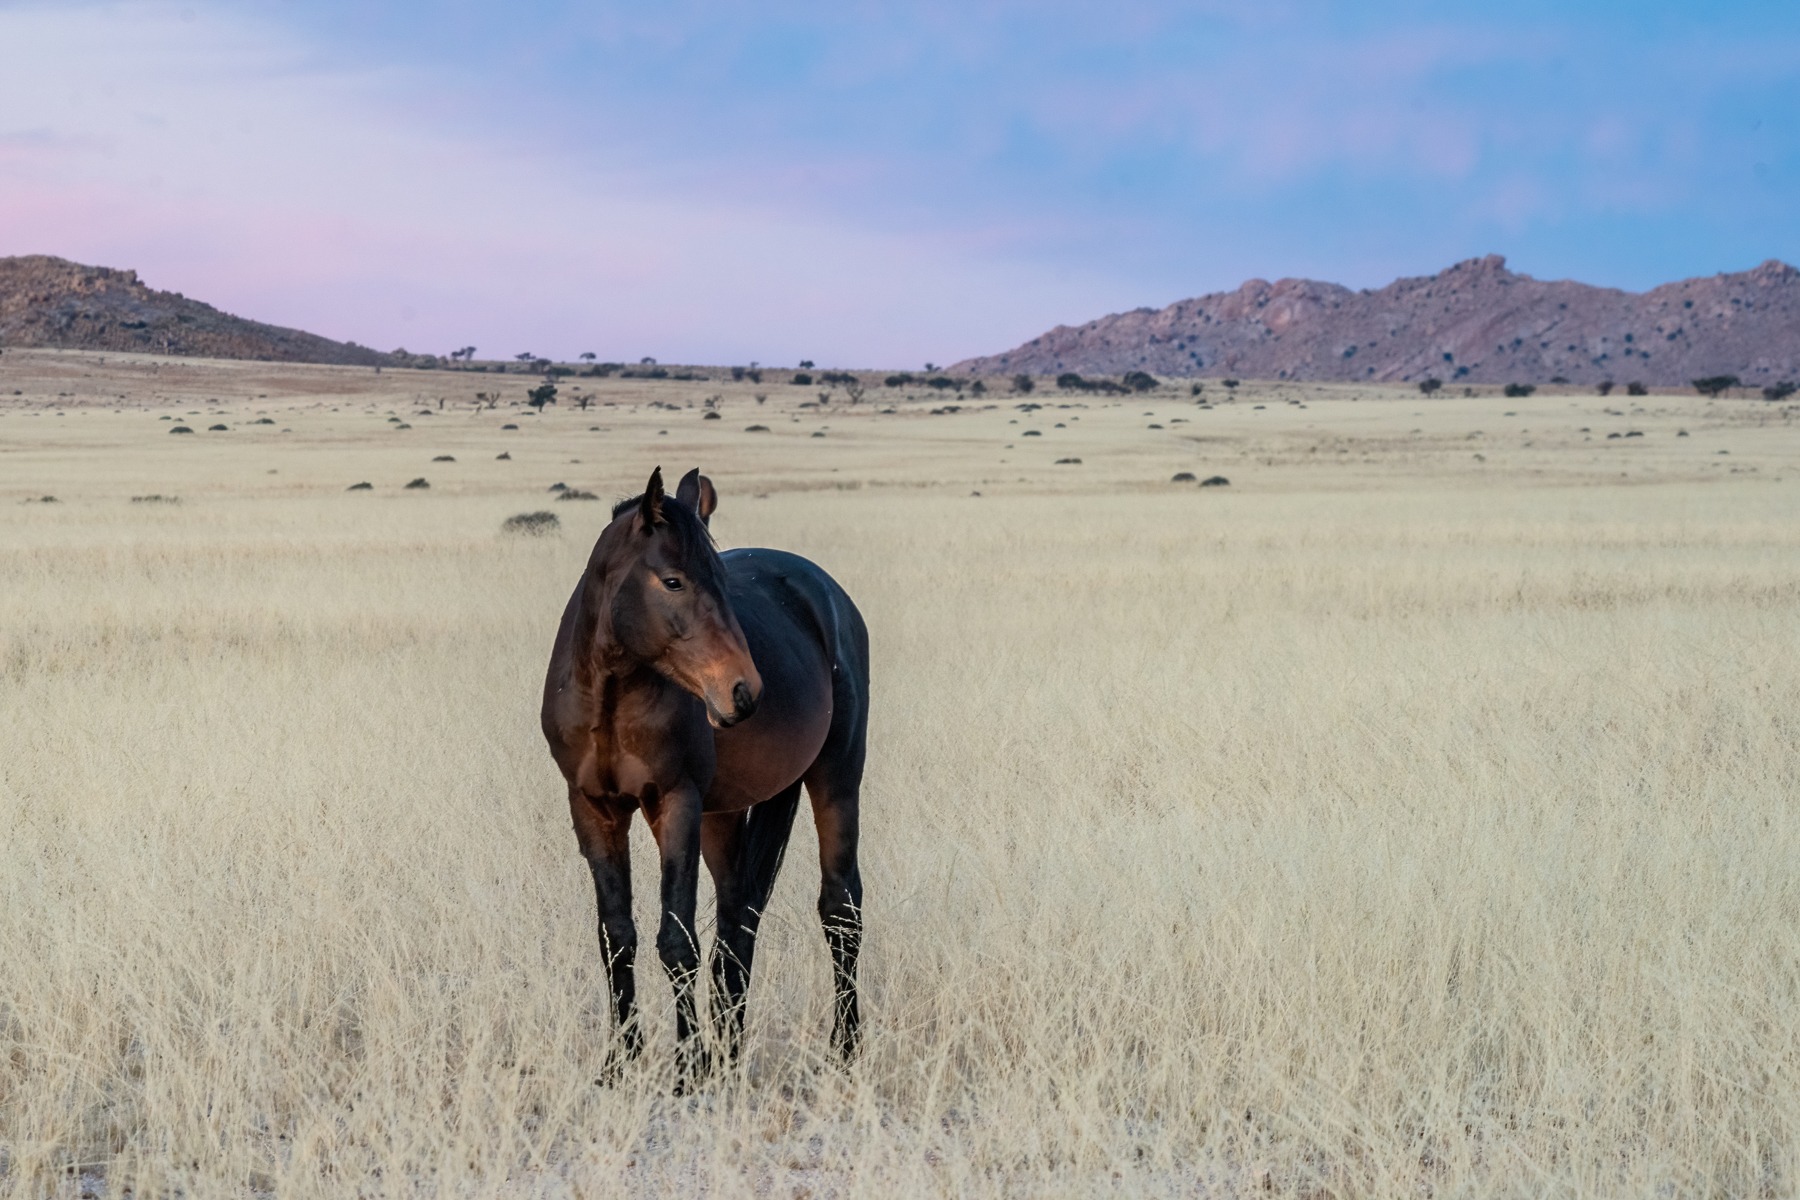 A desert horse in the glow of dusk on our Namibia photography tour